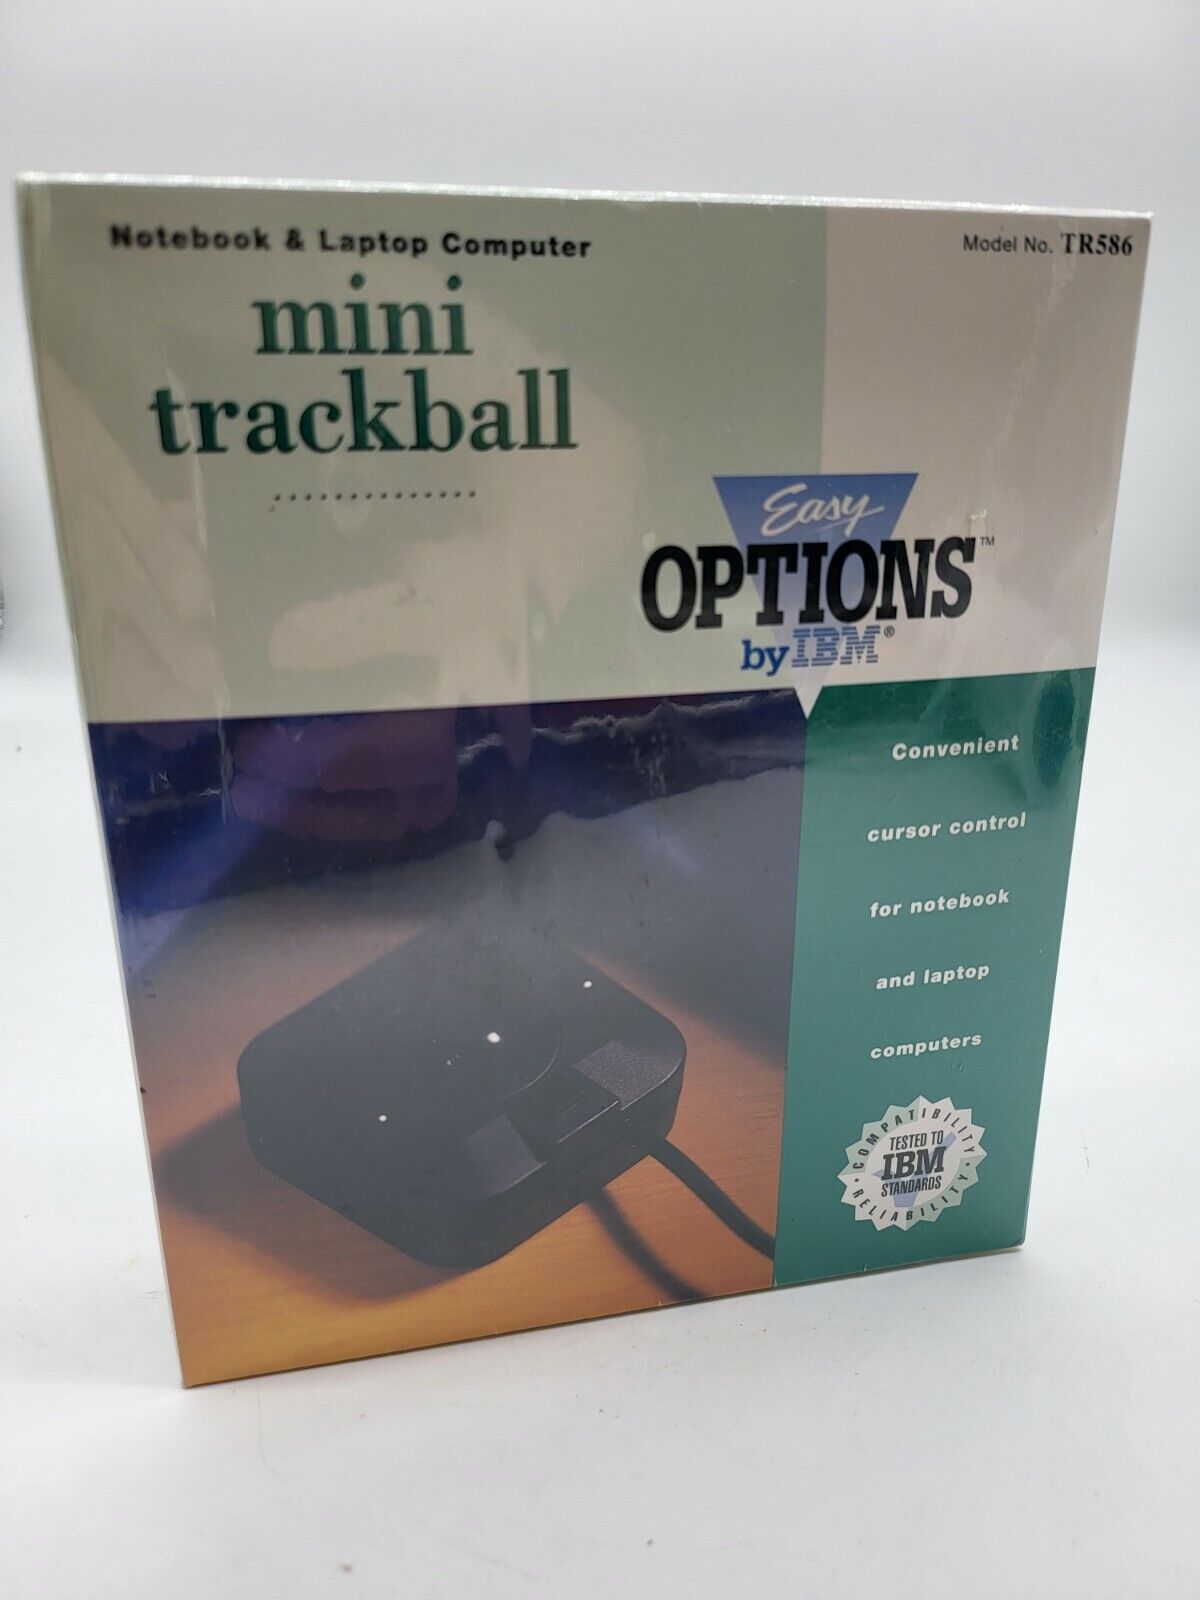 NEW SEALED Easy Options by IBM Notebook and Laptop Computer Mini Trackball TR586